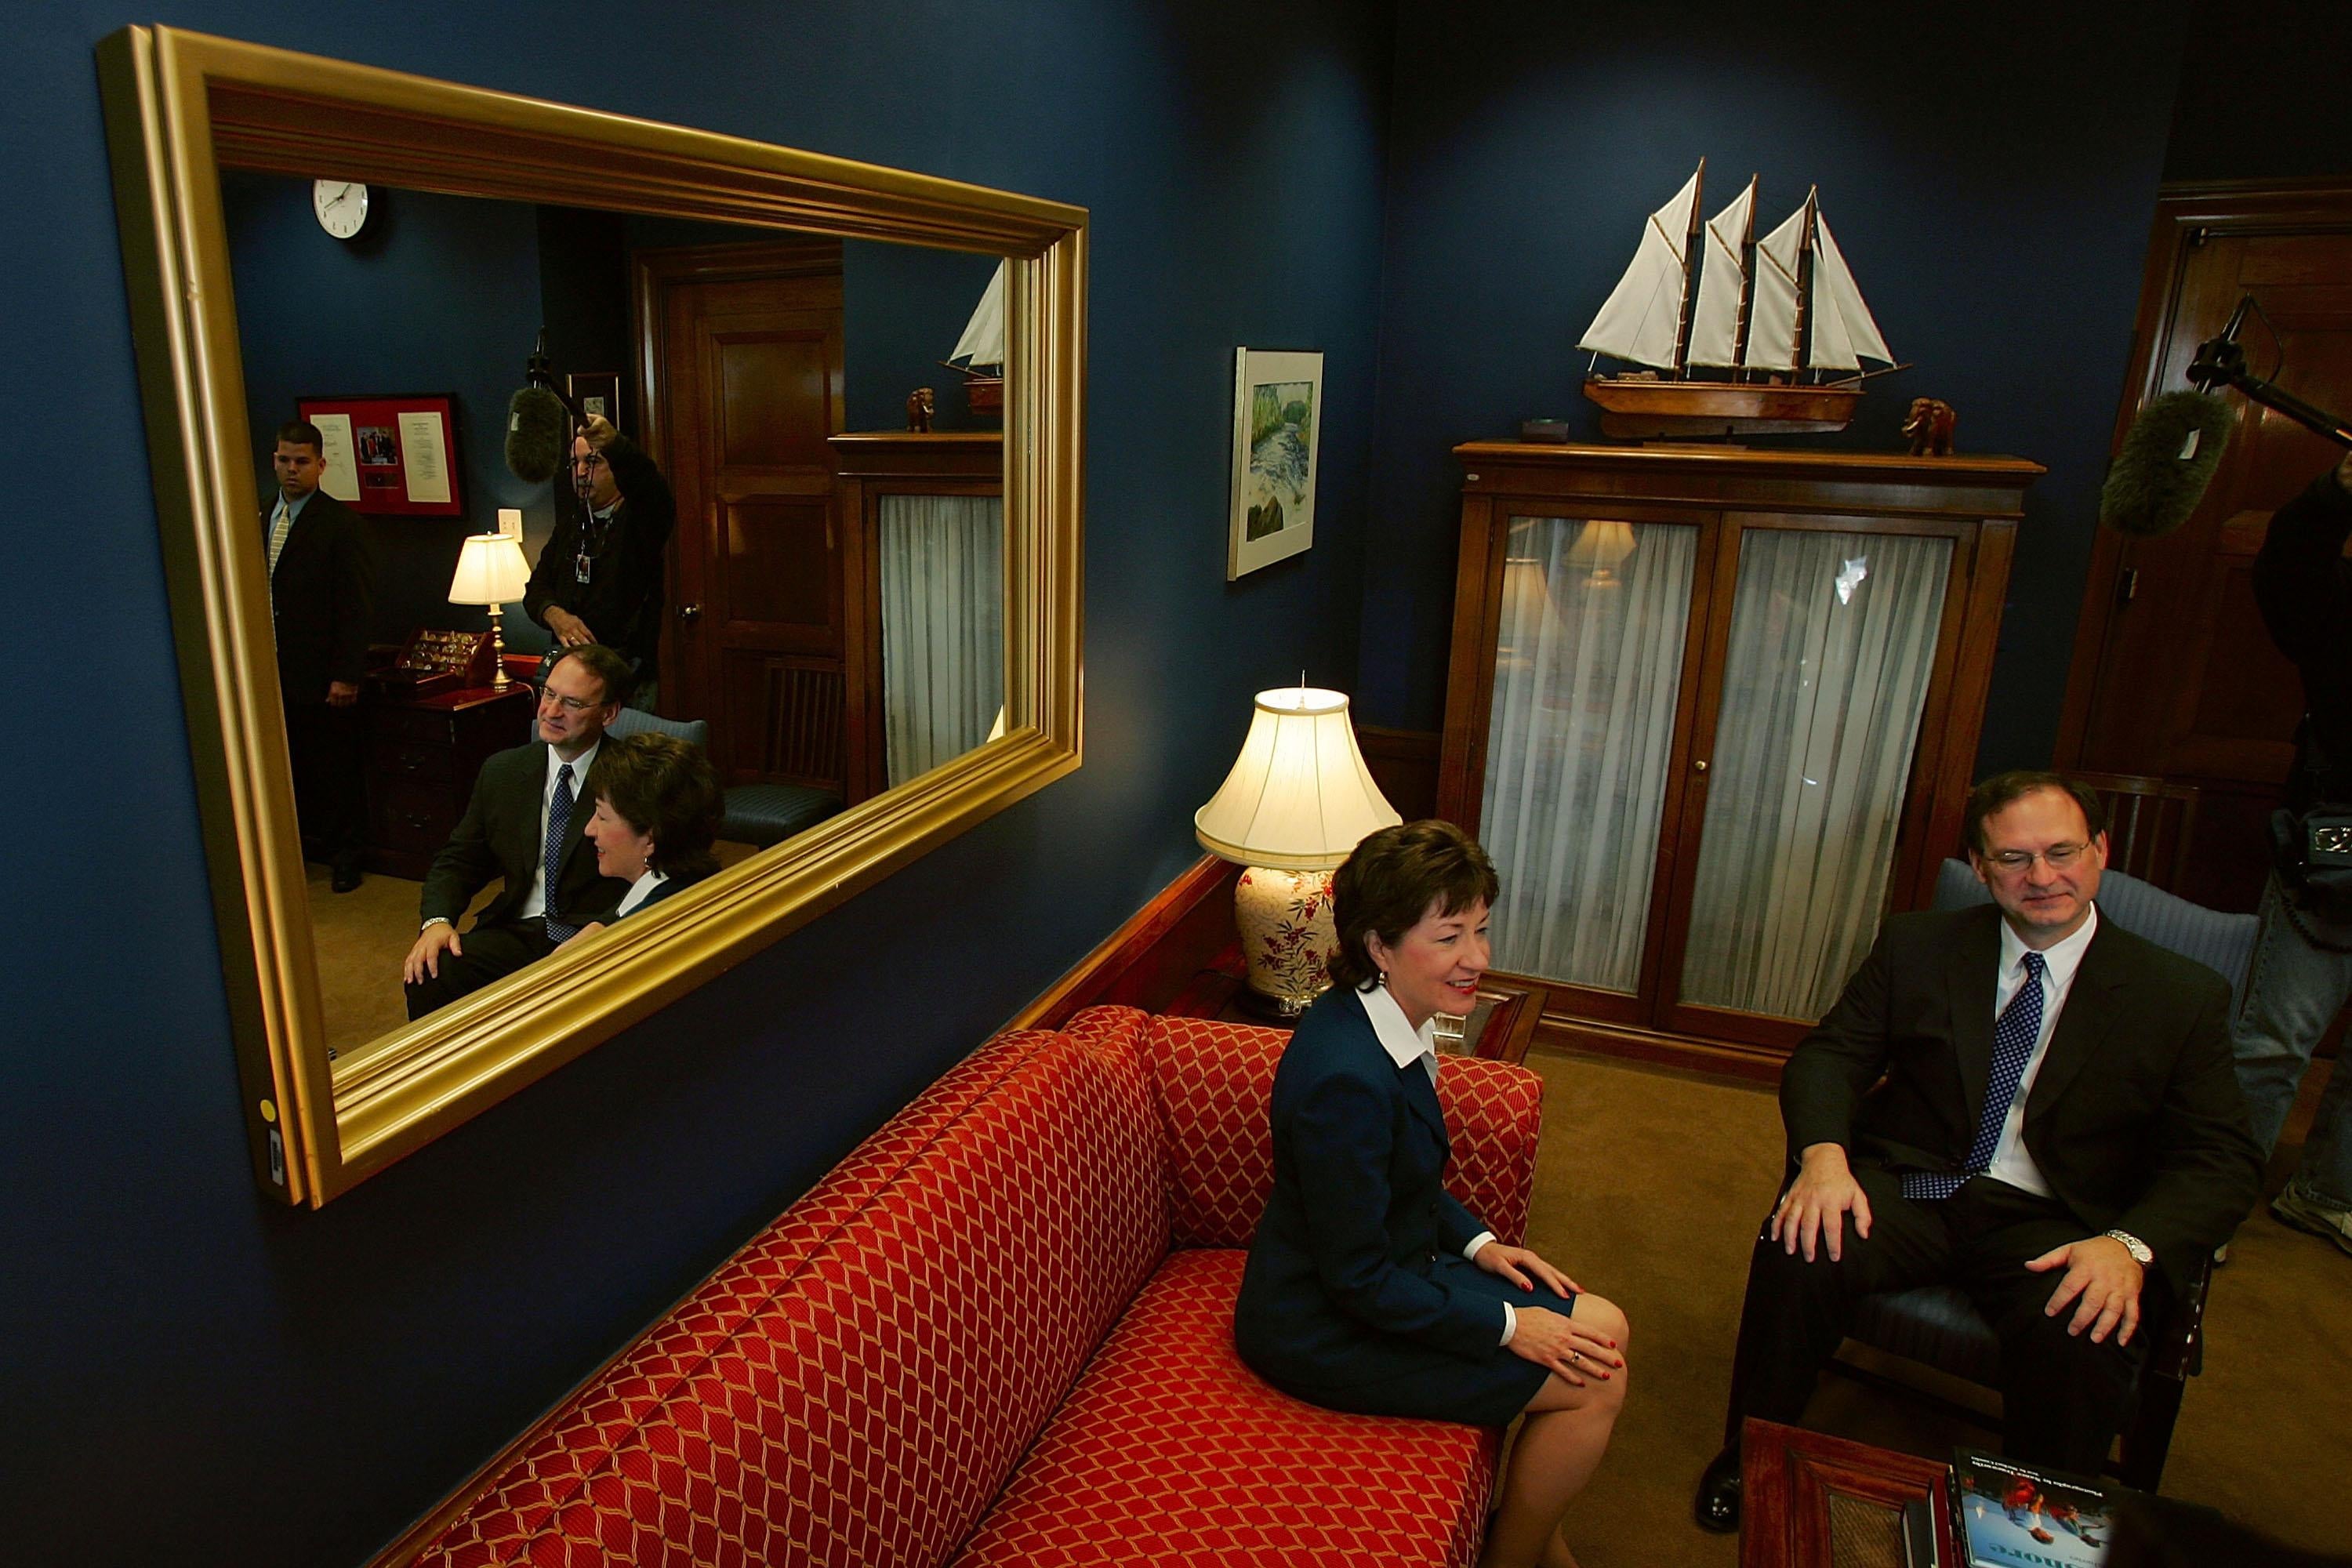 Alito sits in a chair next to Collins sitting on a red couch in a traditionally decorated Capitol room